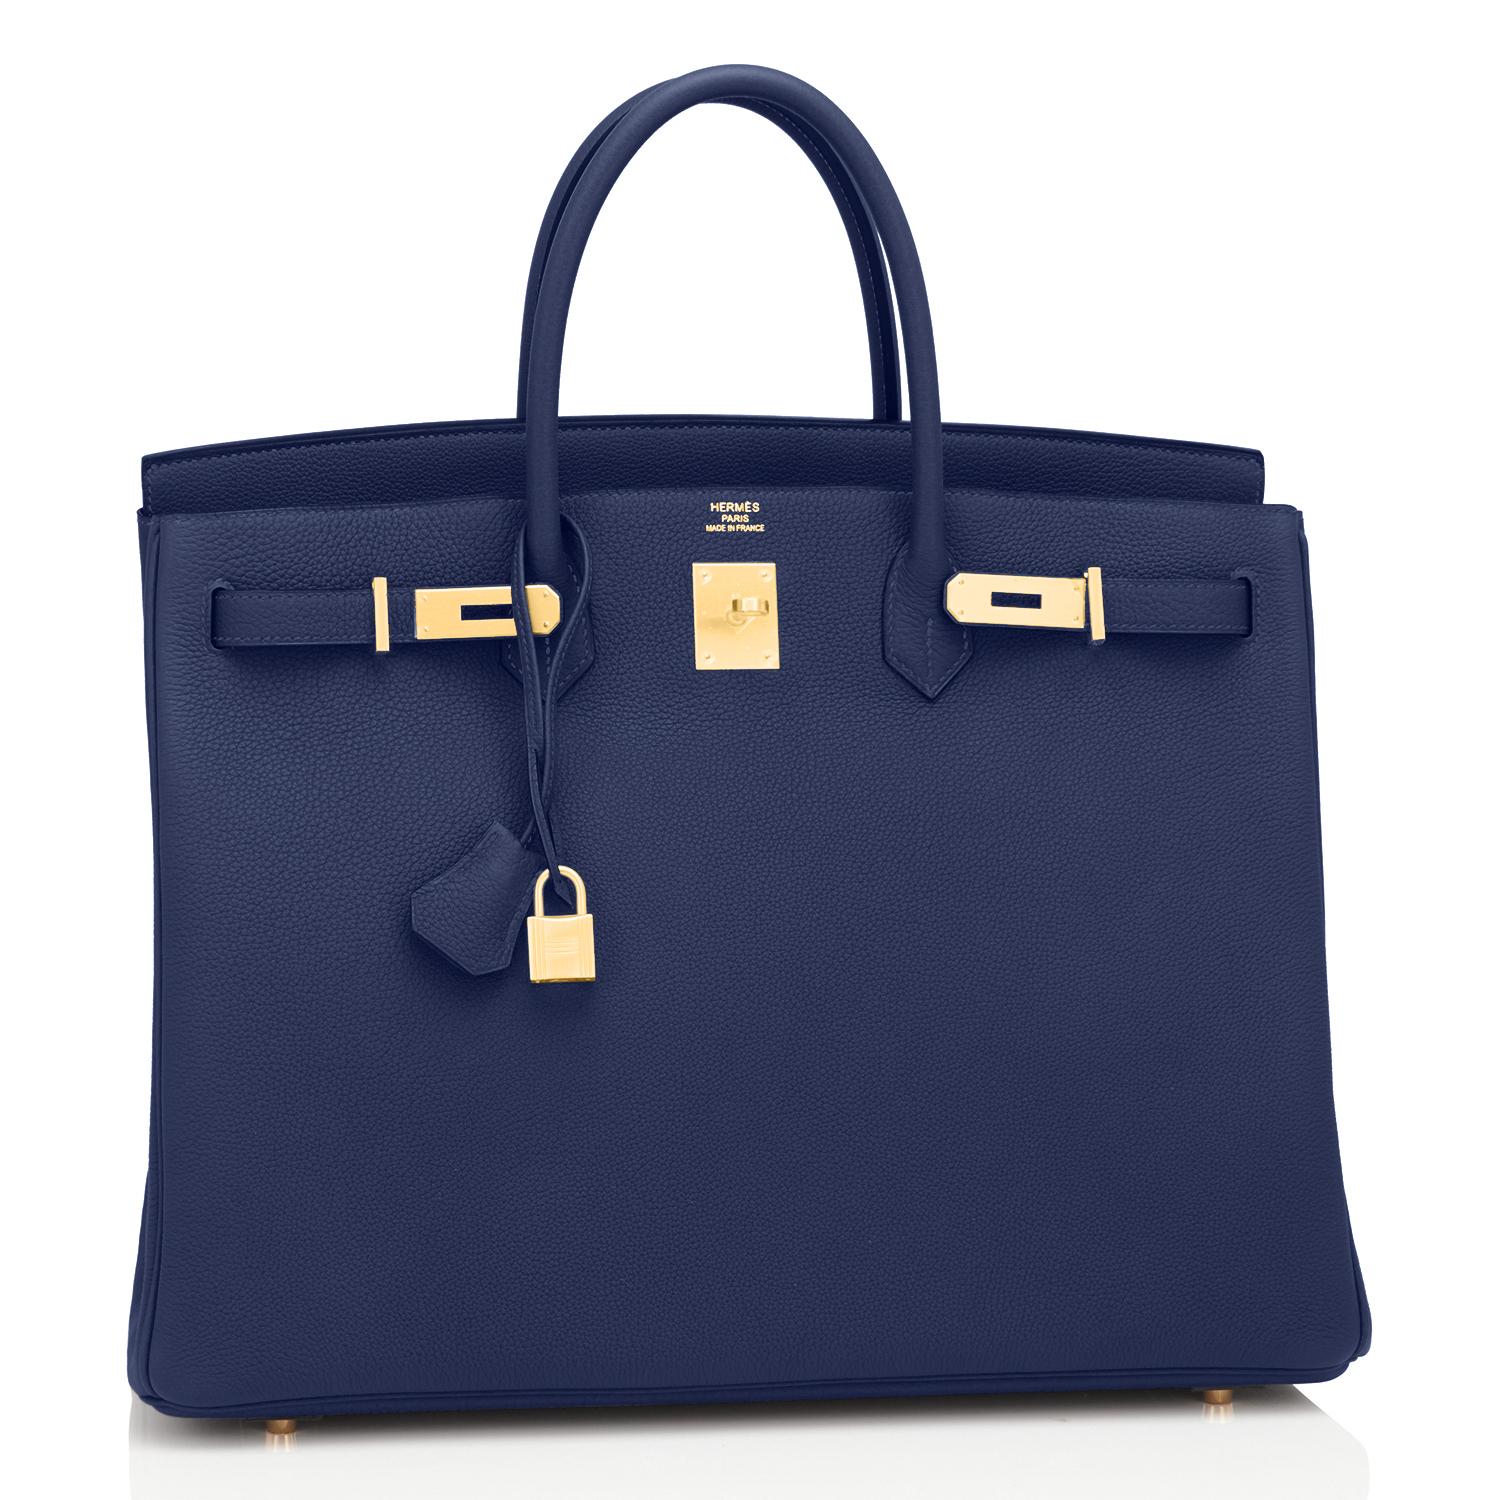 Hermes Birkin 40cm Blue Nuit Navy Blue Togo Gold Birkin Bag Z Stamp, 2021 ULTRA RARE
Finally! The ultra rare perfect navy Birkin 40cm has arrived!
Just purchased from Hermes store; bag bears new 2021 interior Z Stamp (first in market!)
Brand New in